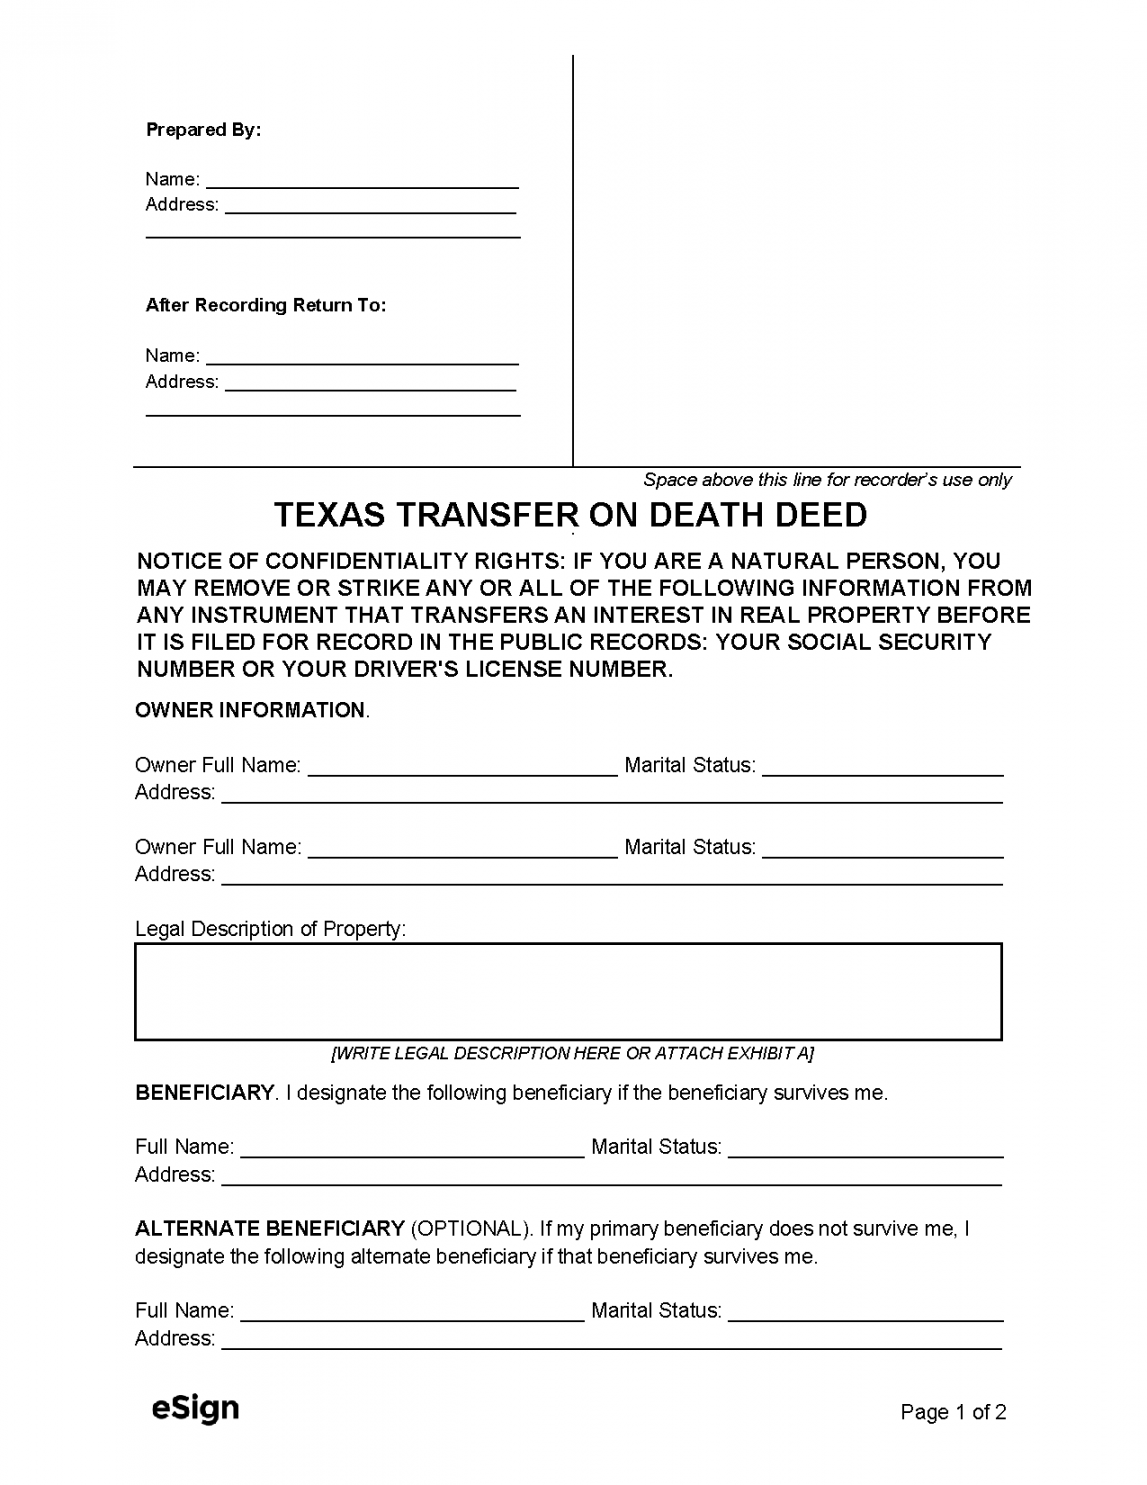 Free Printable Transfer On Death Deed Form - Printable - Free Texas Transfer on Death Deed Form  PDF  Word